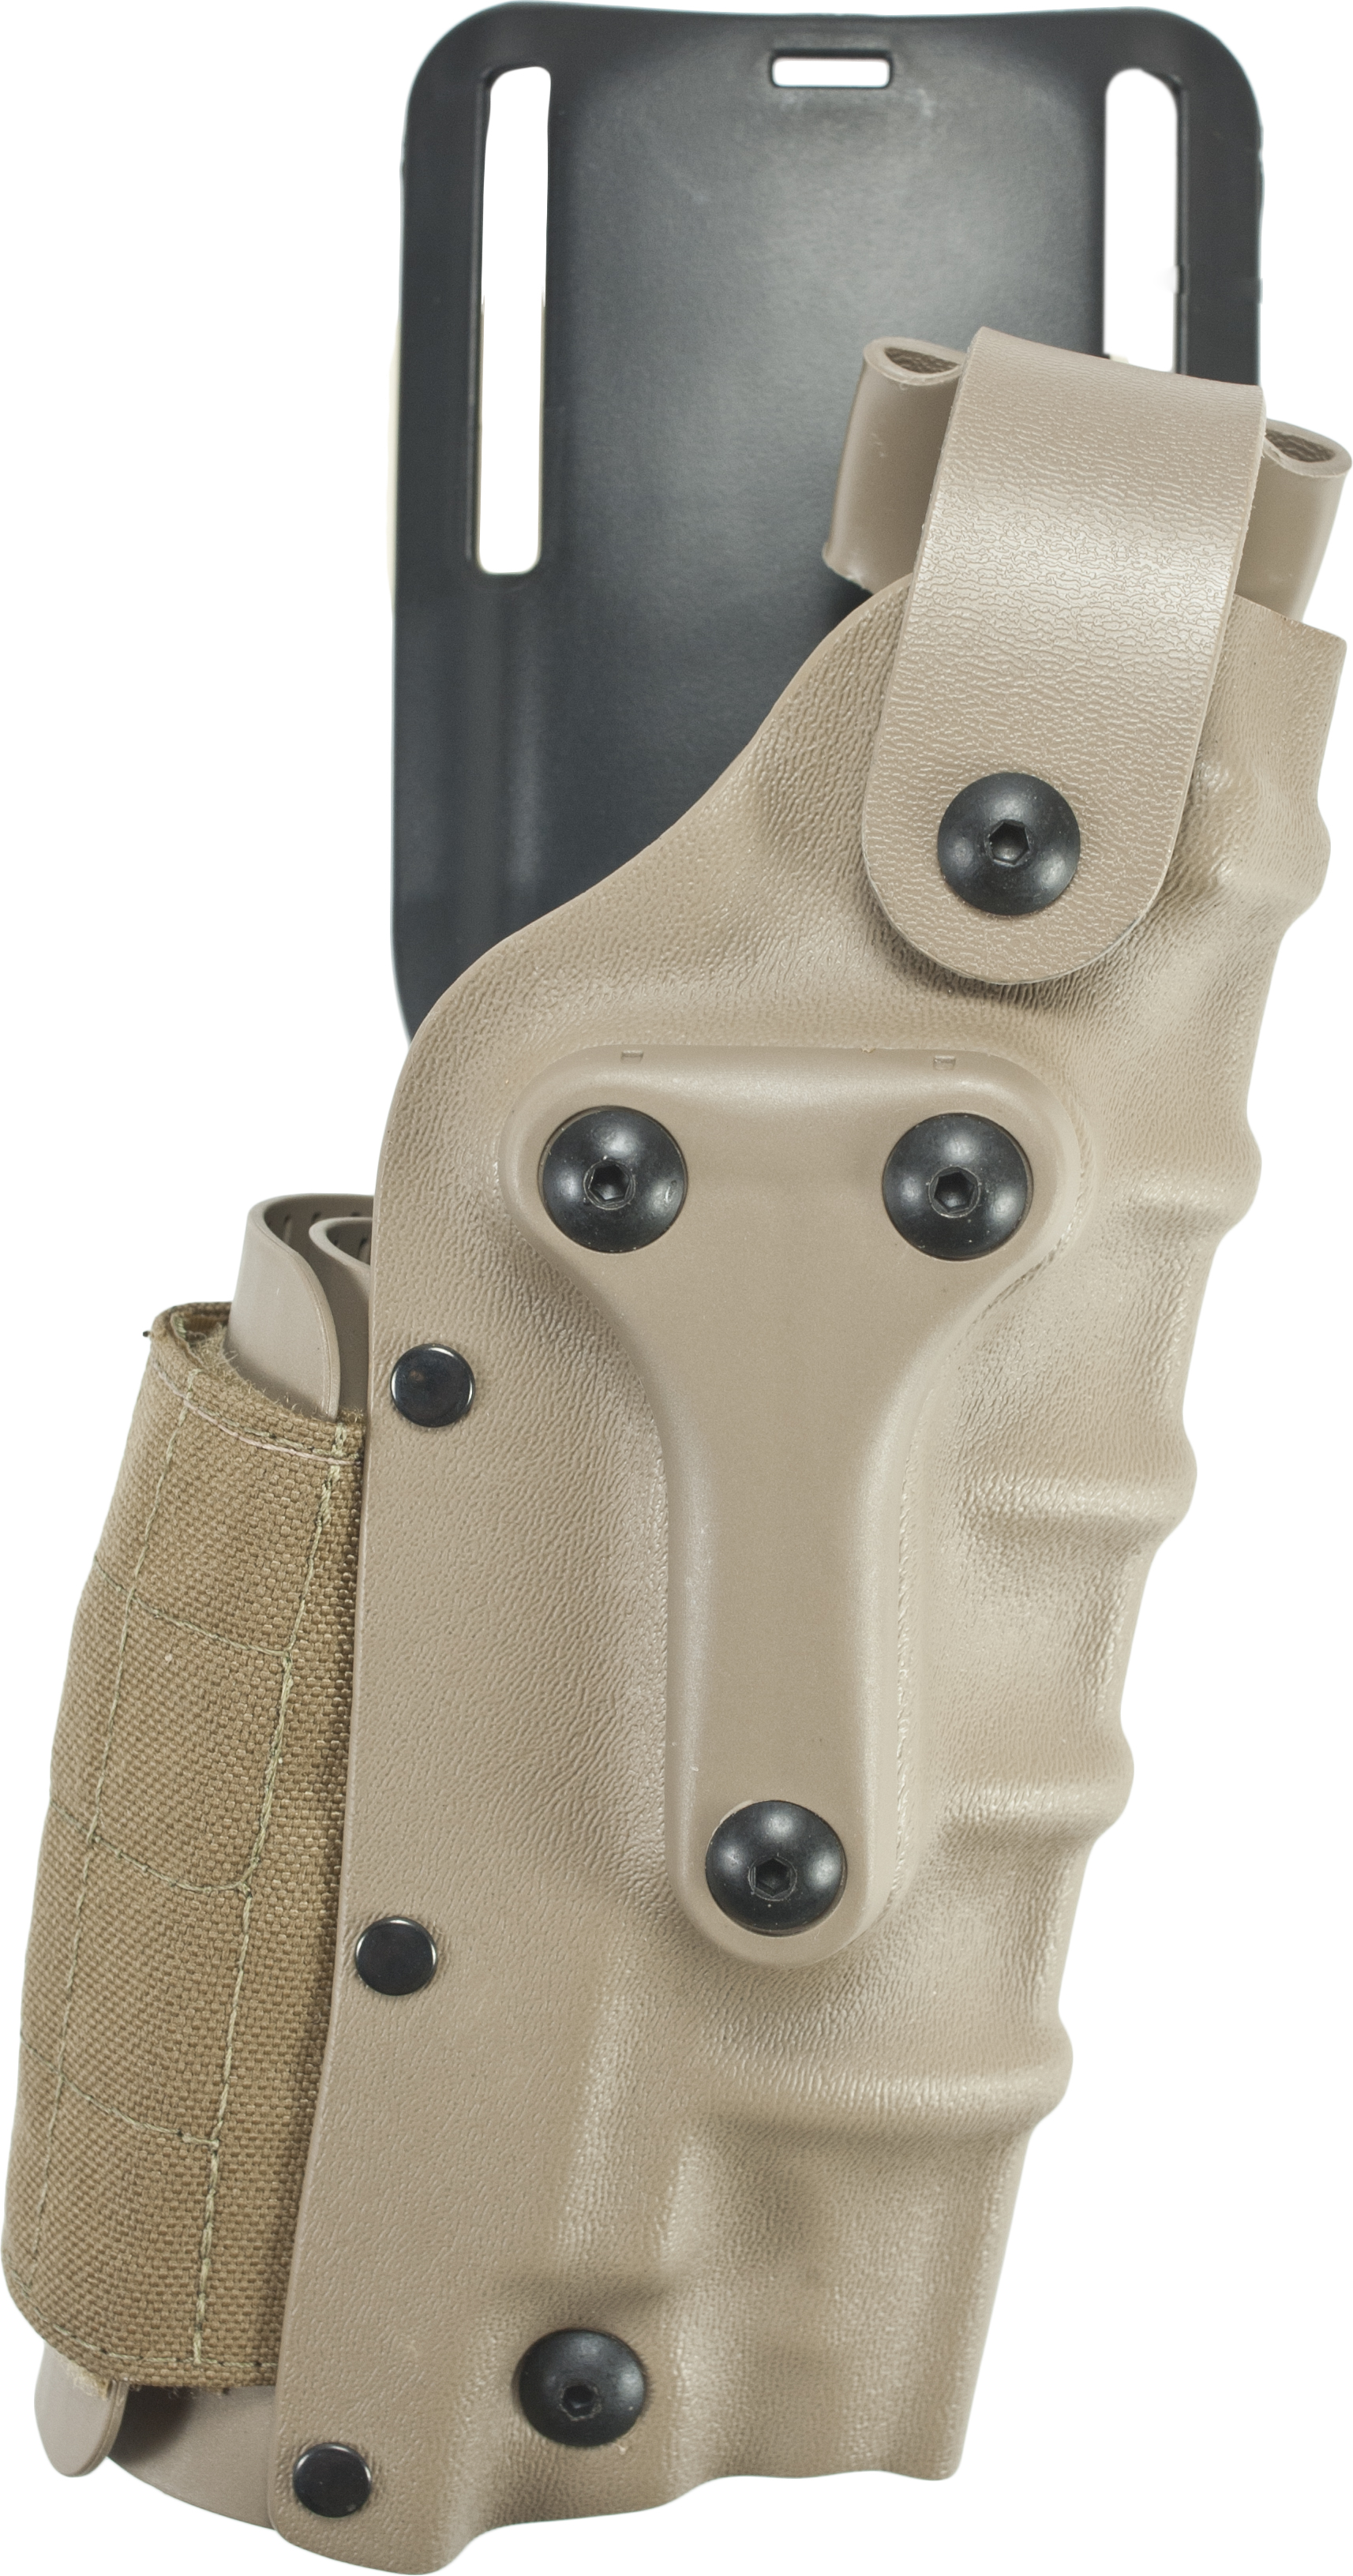 Safariland Military Tactical Holster - STX FDE Brown, Right 3285